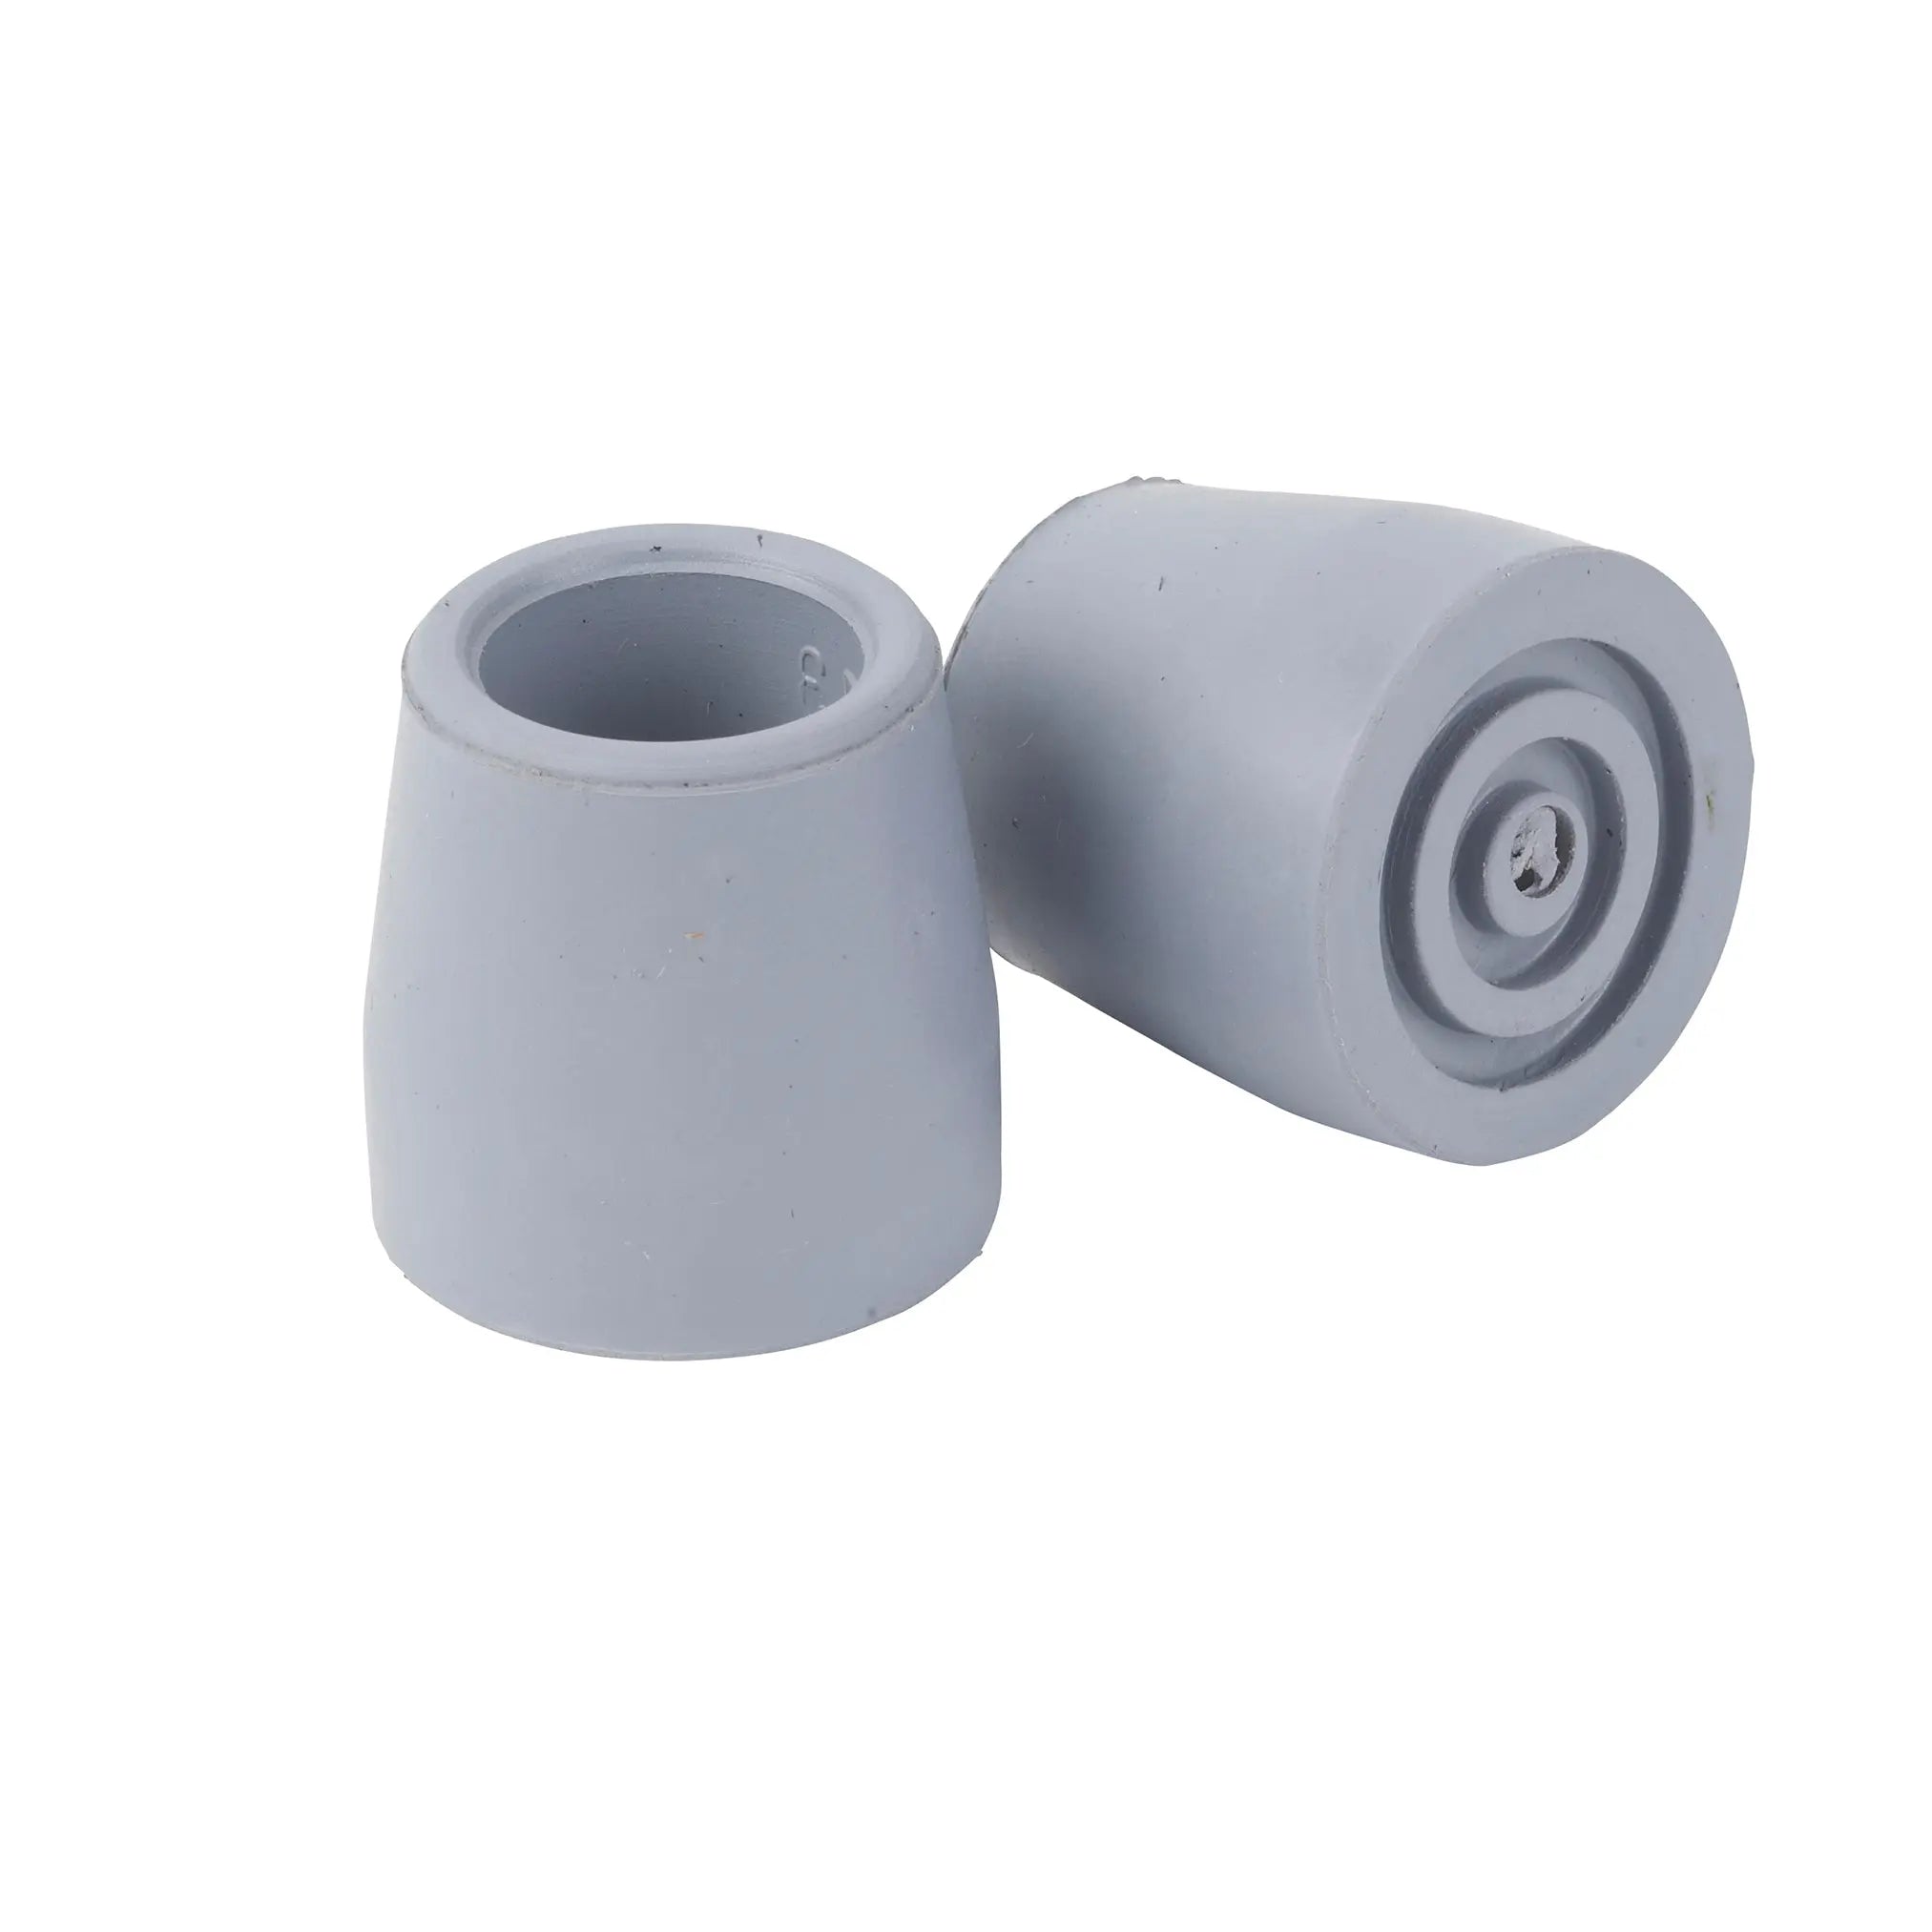 Utility Walker Replacement Tips - Home Health Store Inc